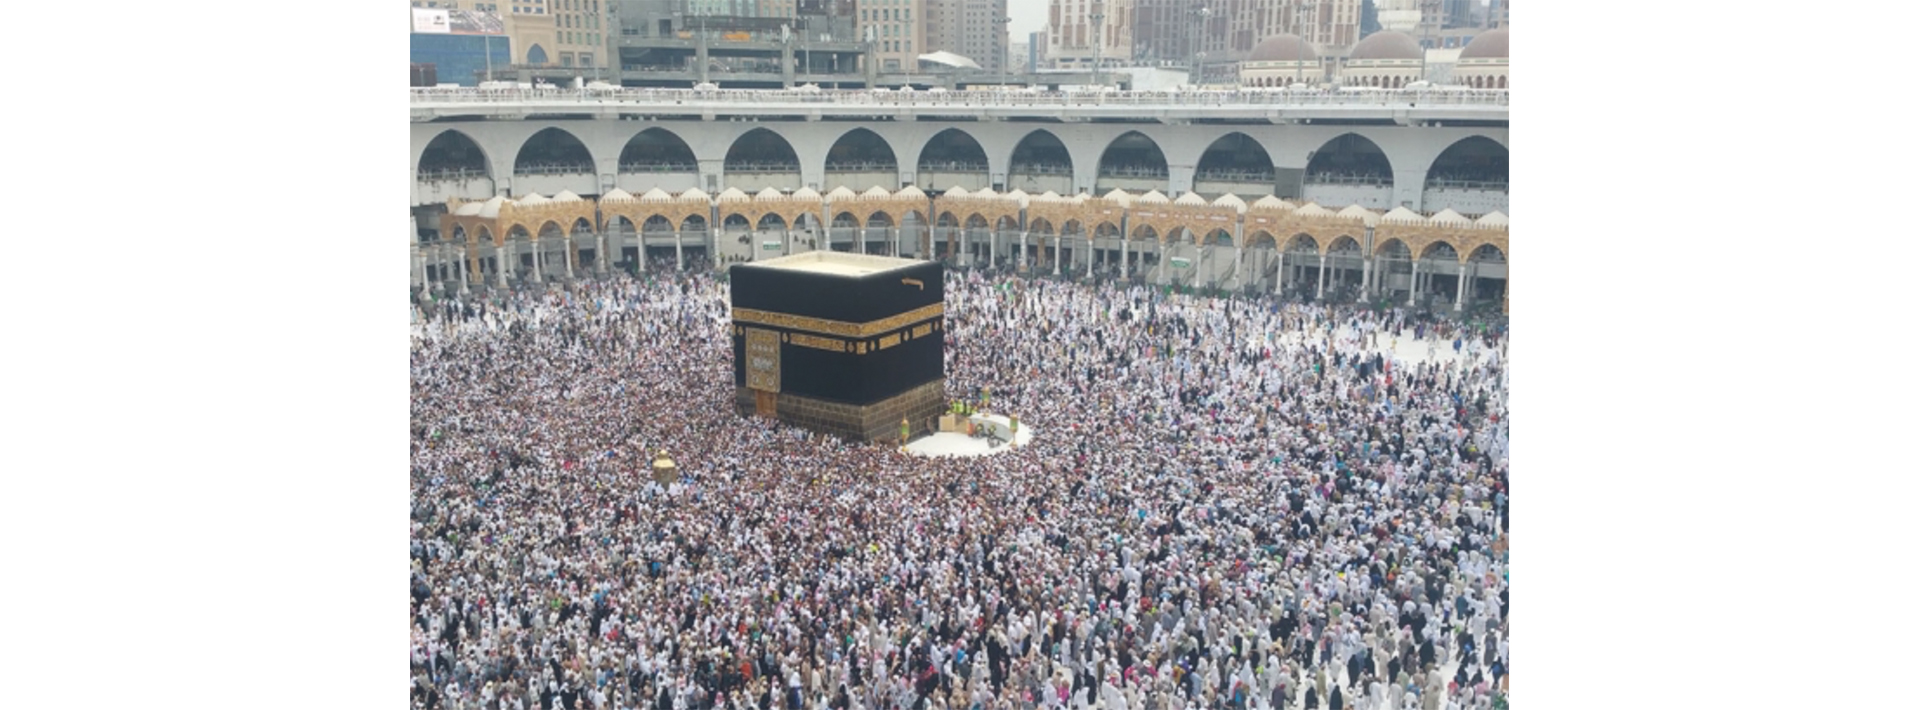 Professor Elfatih Eltahir, Jeremy S. Pal SM ’97, PhD ’01 and postdoctoral associate Suchul Kang published research paper in Geophysical Research Letters titled “Future heat stress during Muslim pilgrimage (Hajj) projected to exceed ‘extreme danger’ levels”